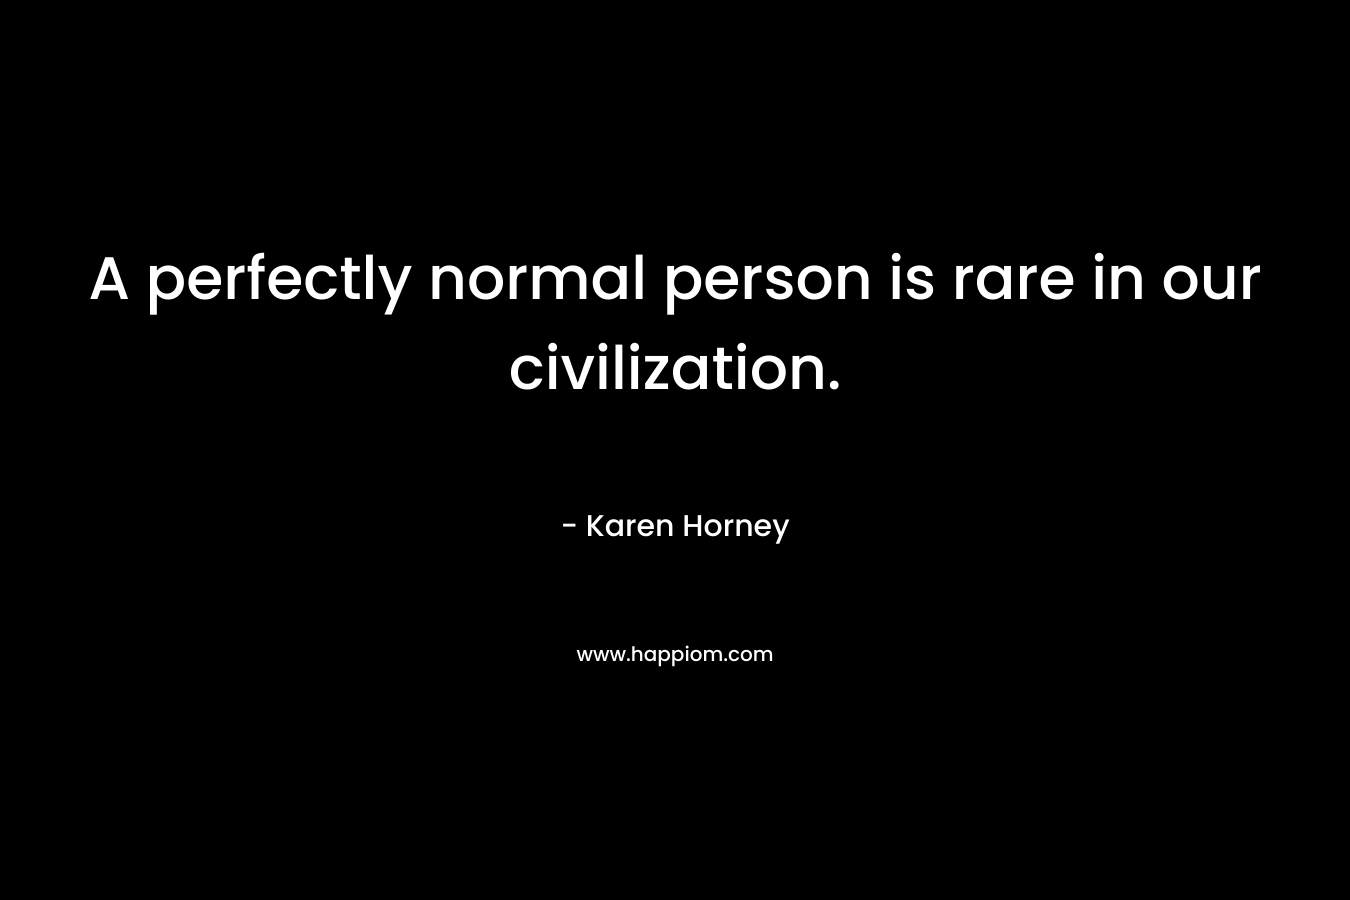 A perfectly normal person is rare in our civilization. – Karen Horney